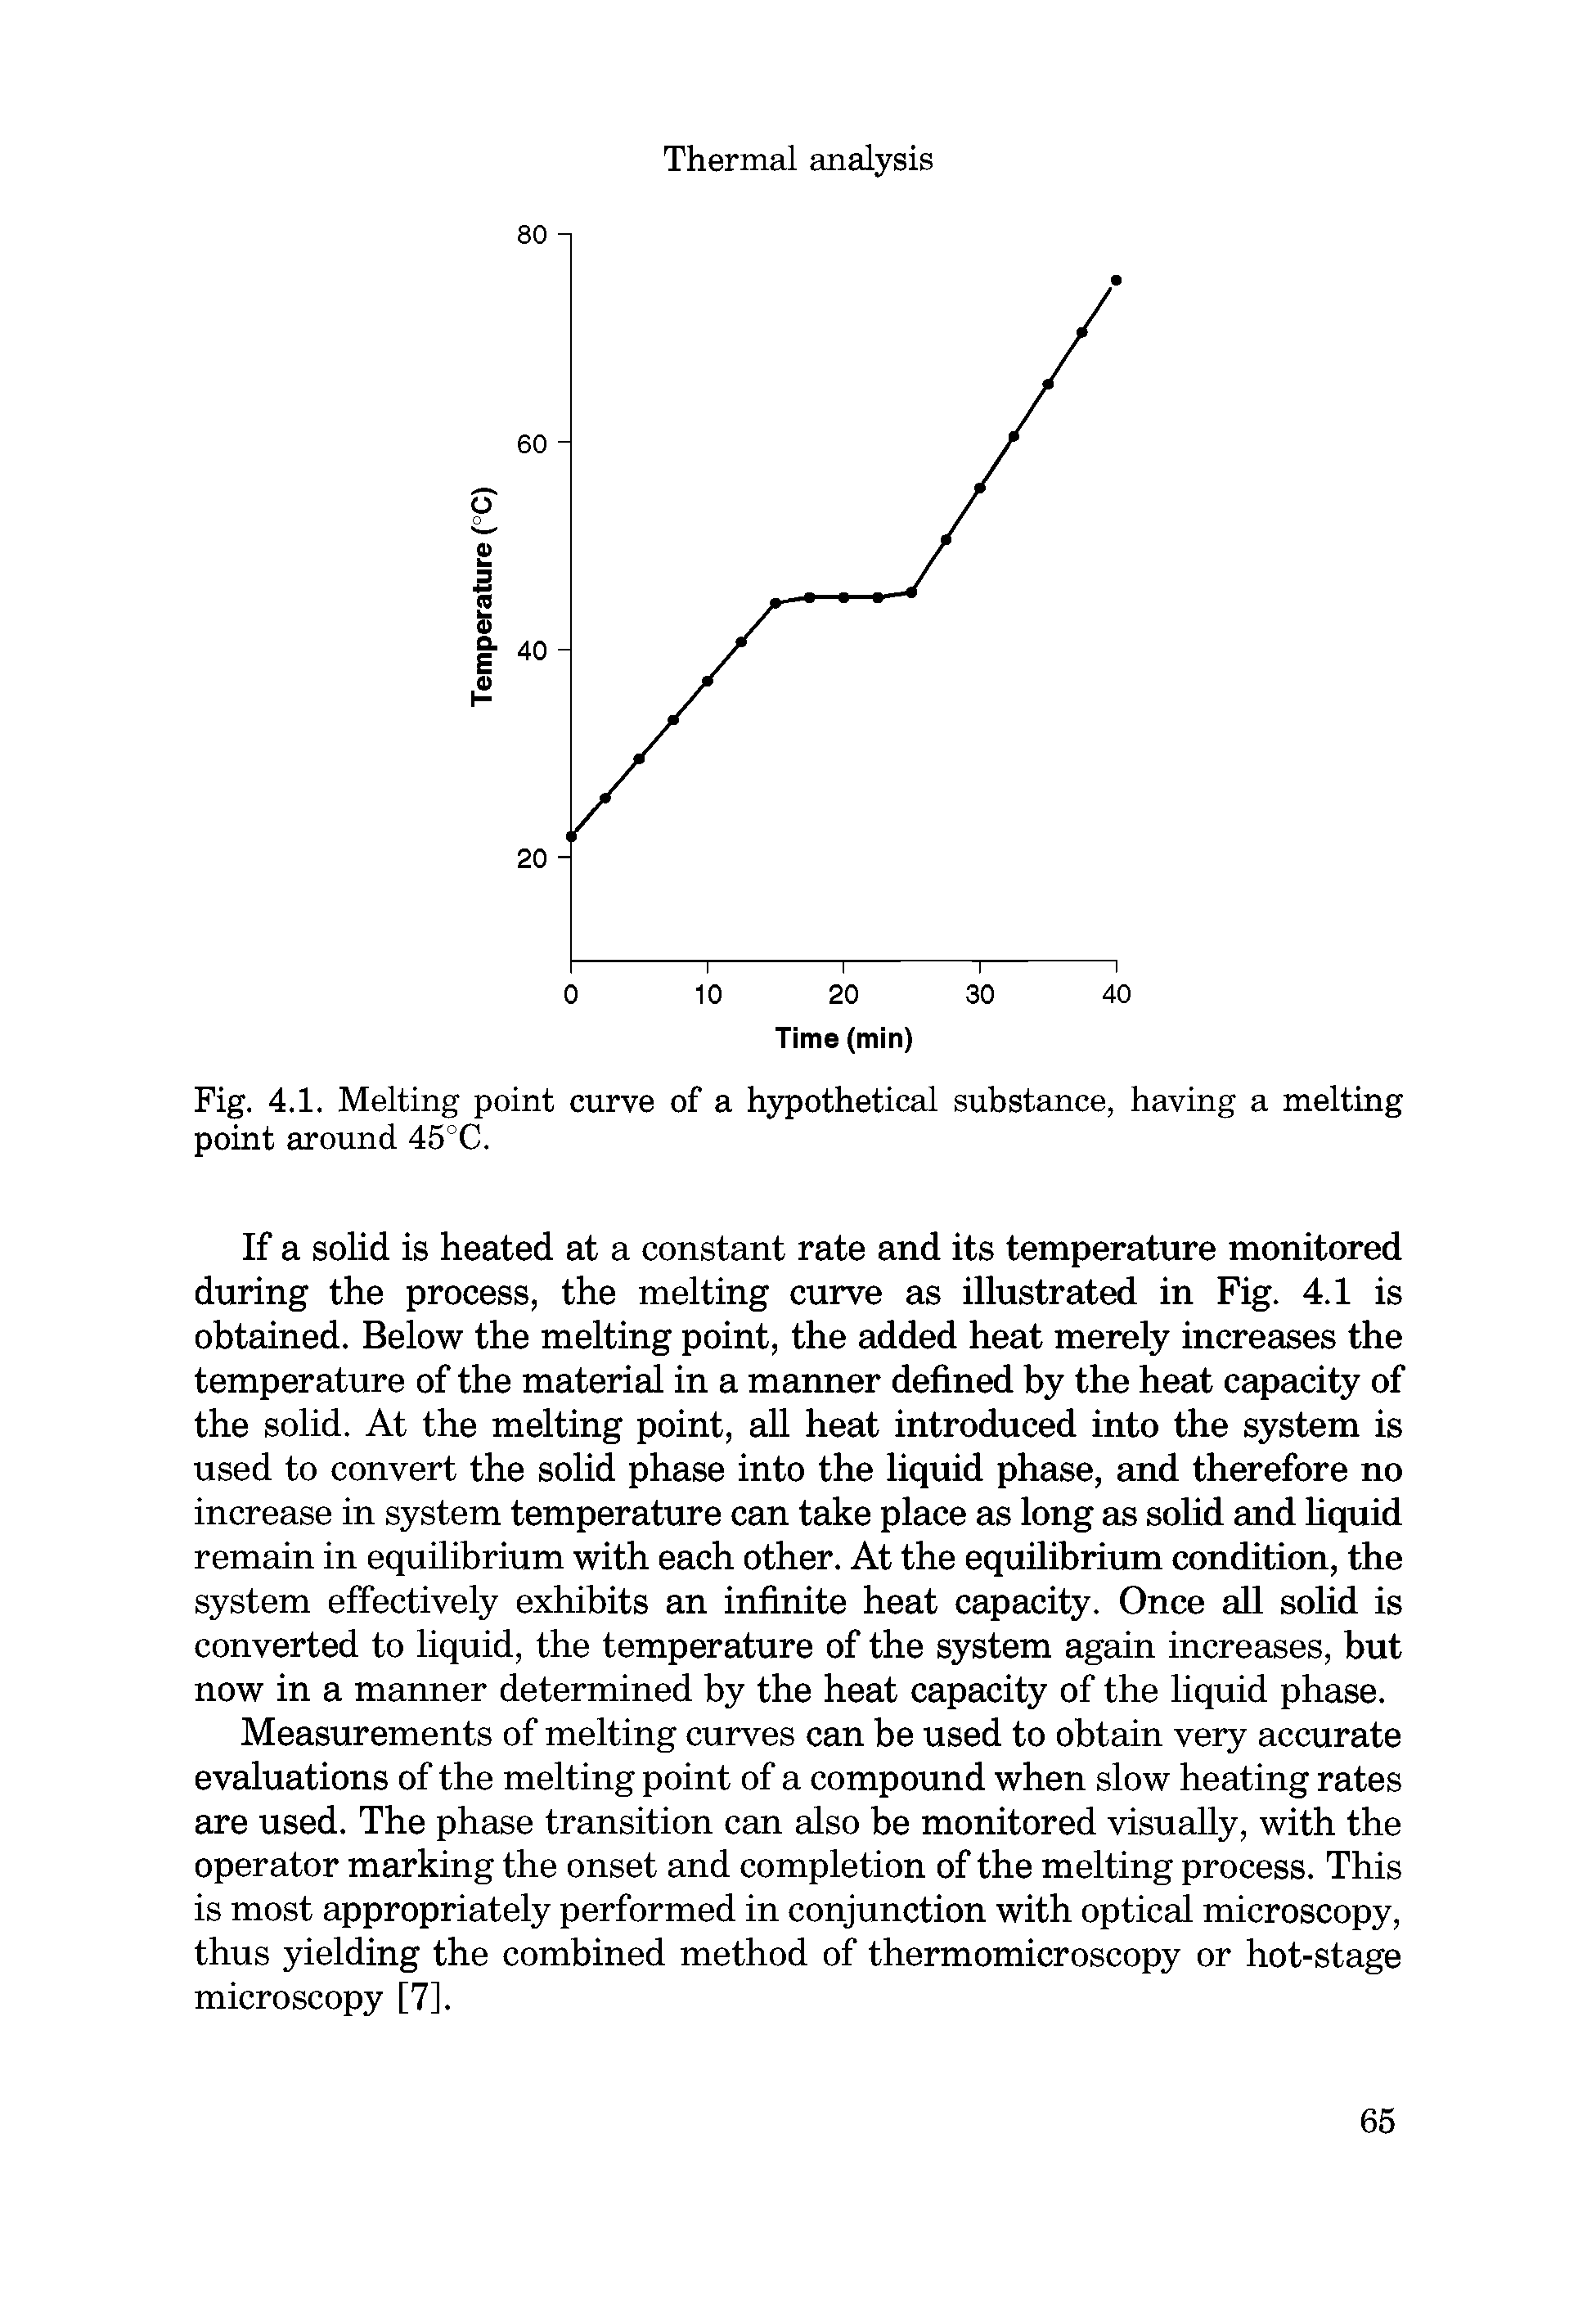 Fig. 4.1. Melting point curve of a hypothetical substance, having a melting point around 45°C.